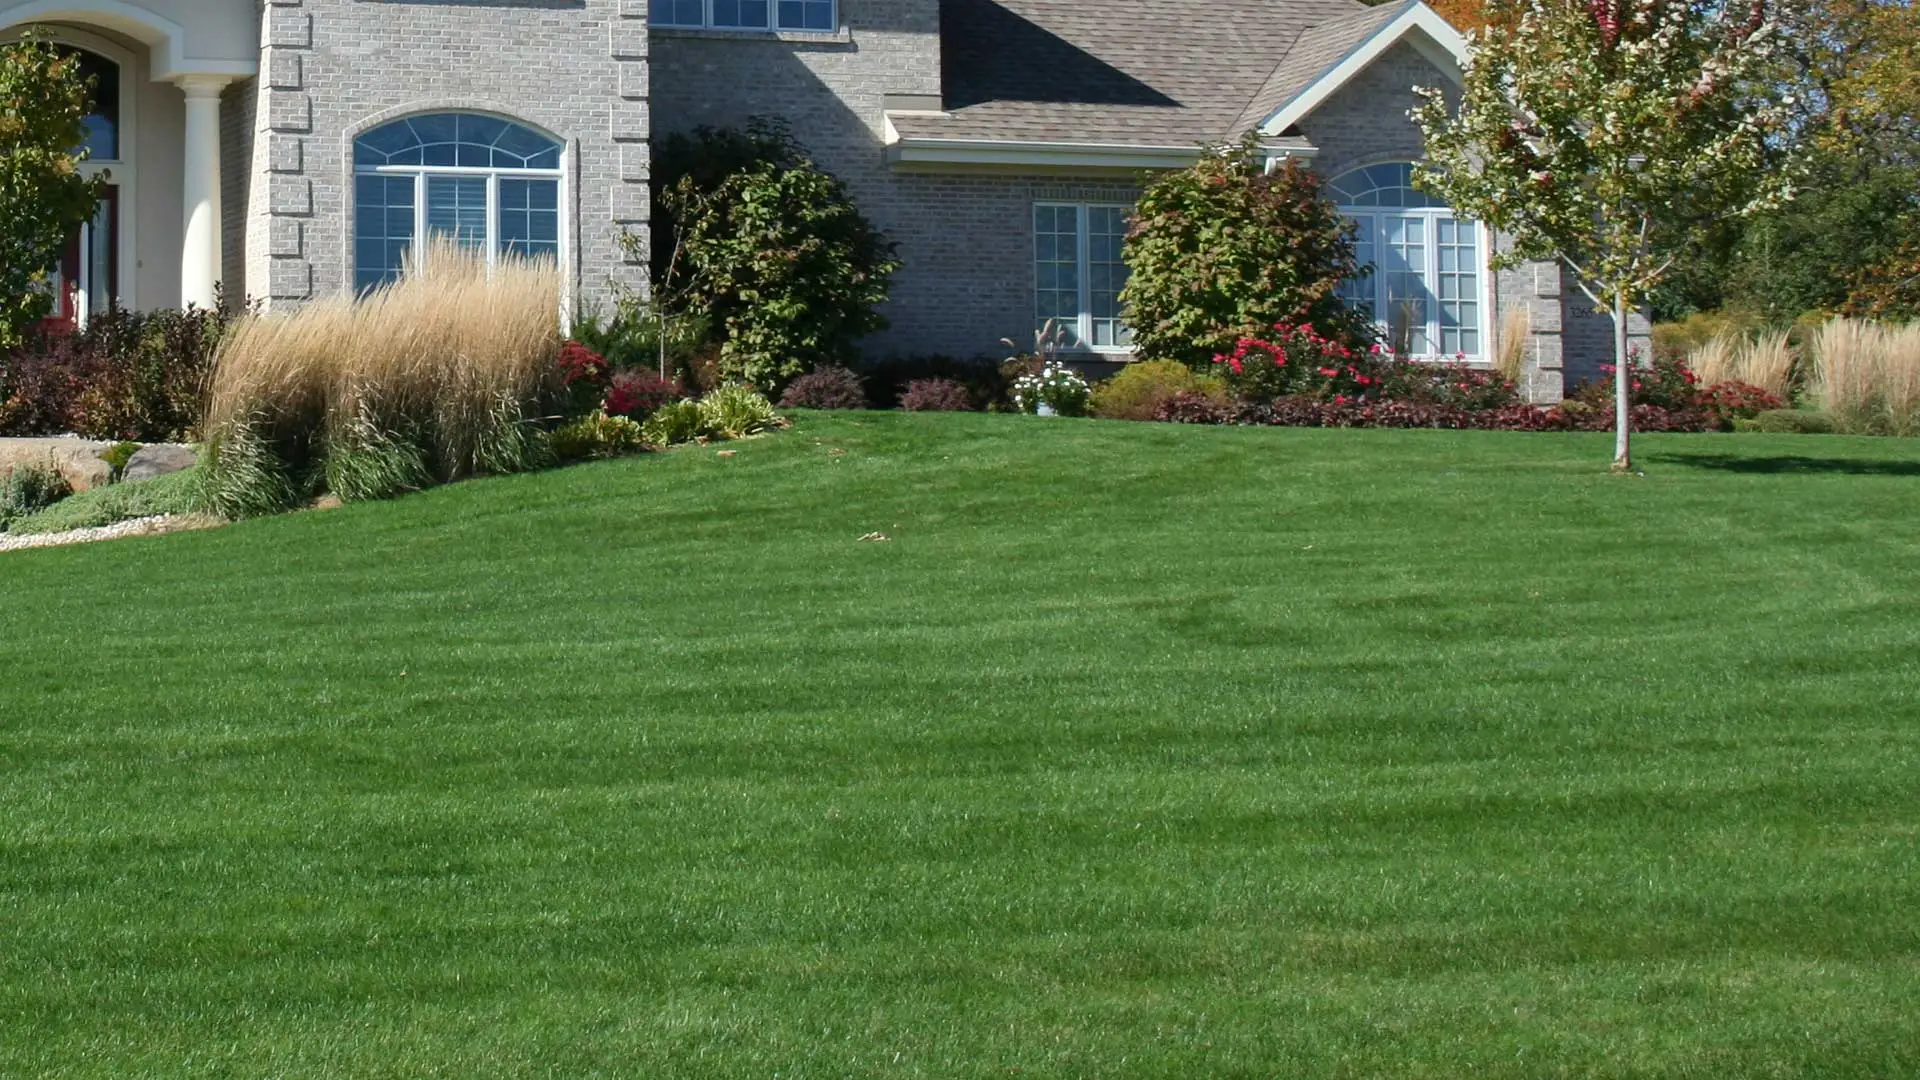 Lawn care services at a residential property in Berkeley Heights, NJ.